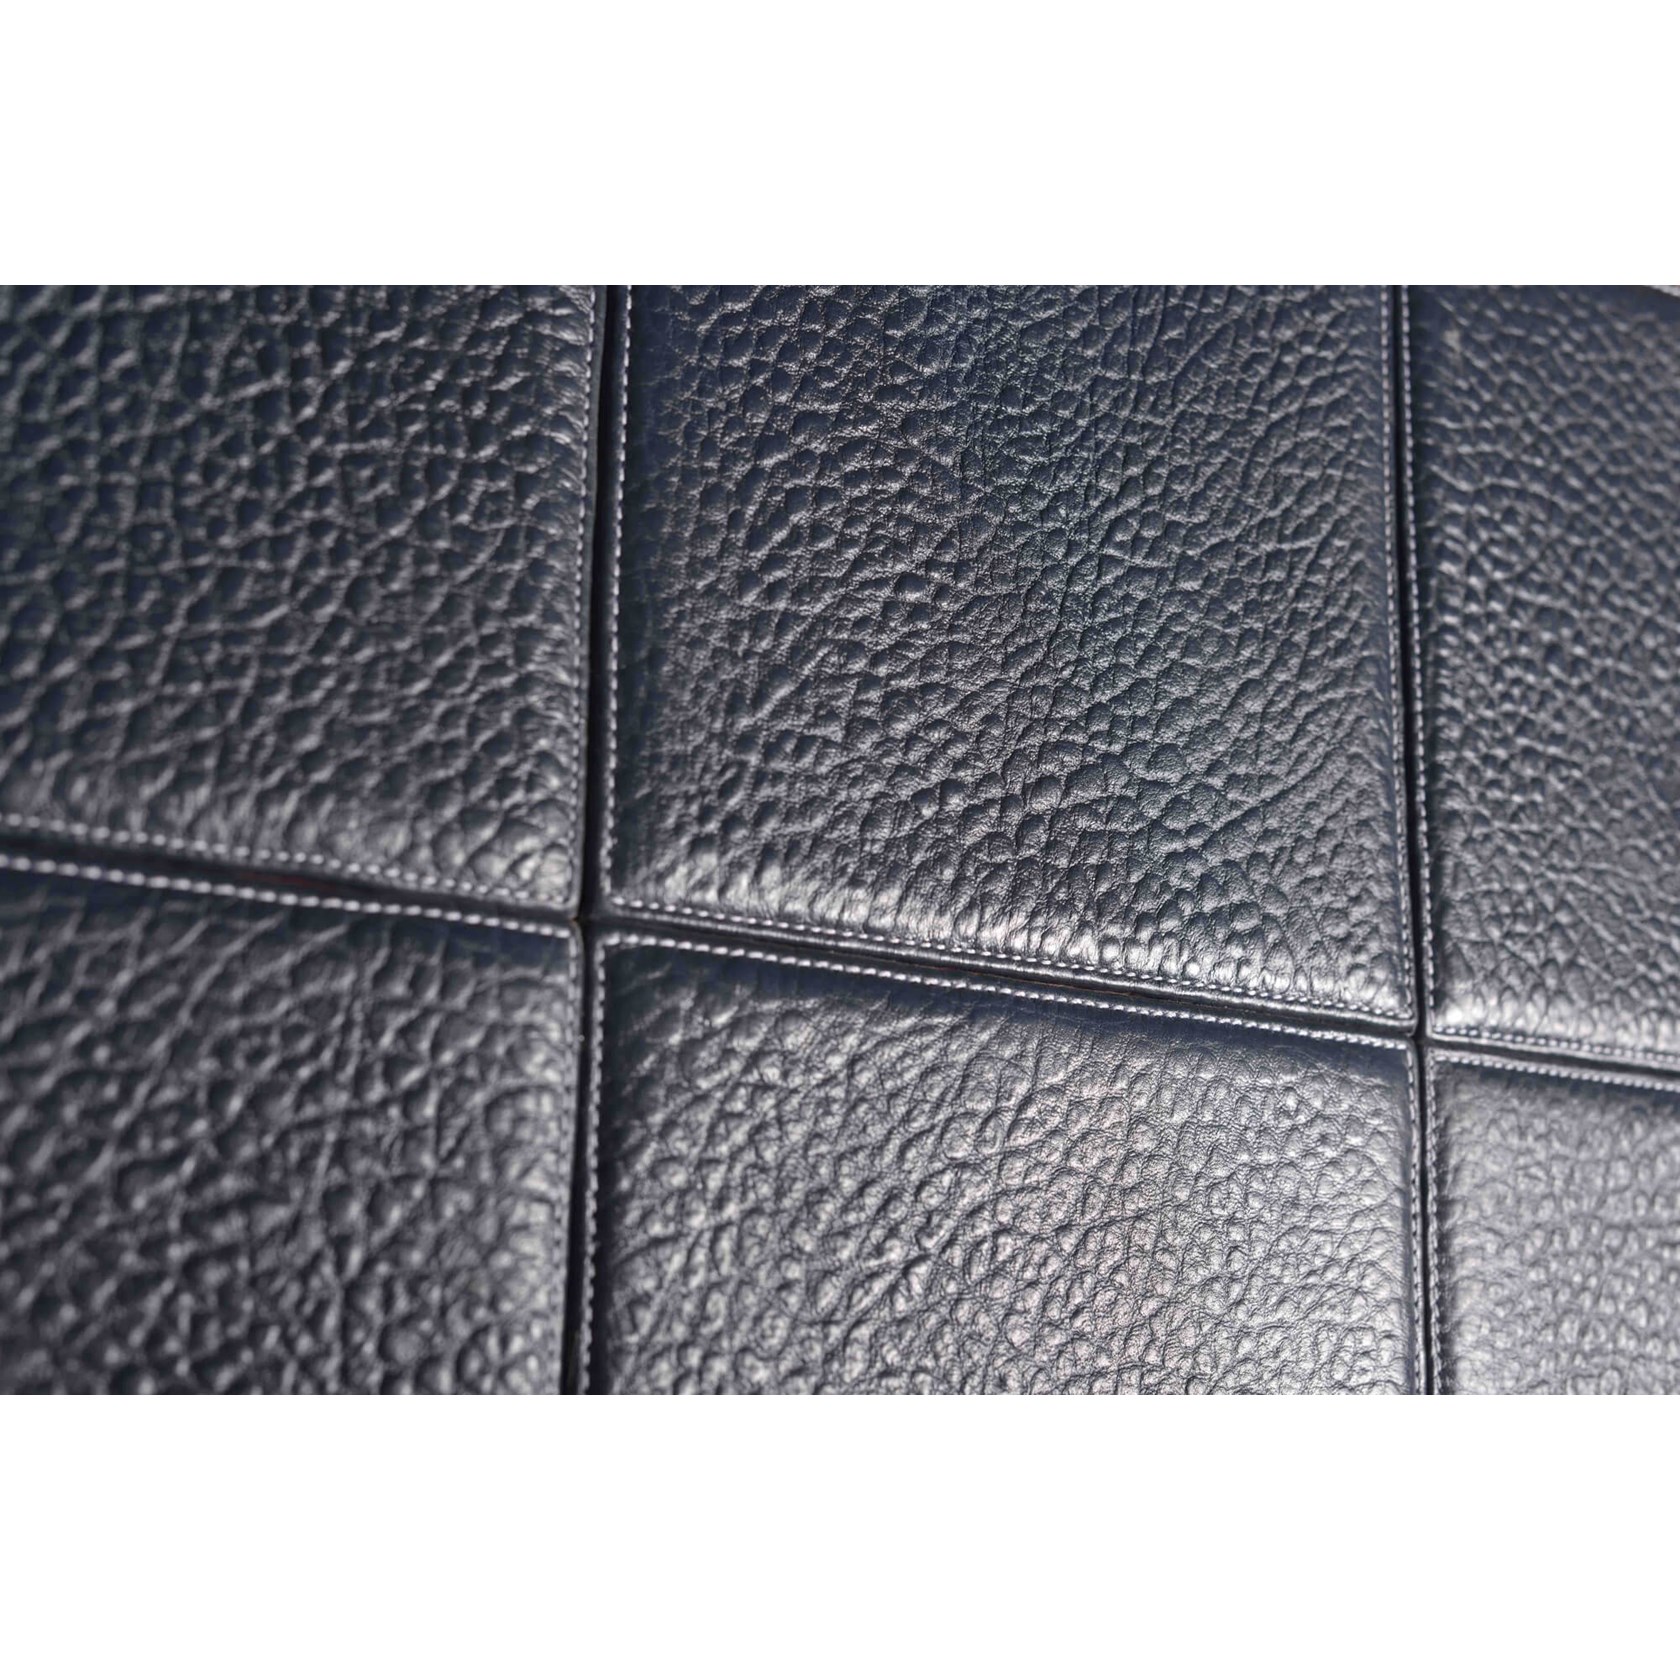 >Leather Wall - Stitched Edge